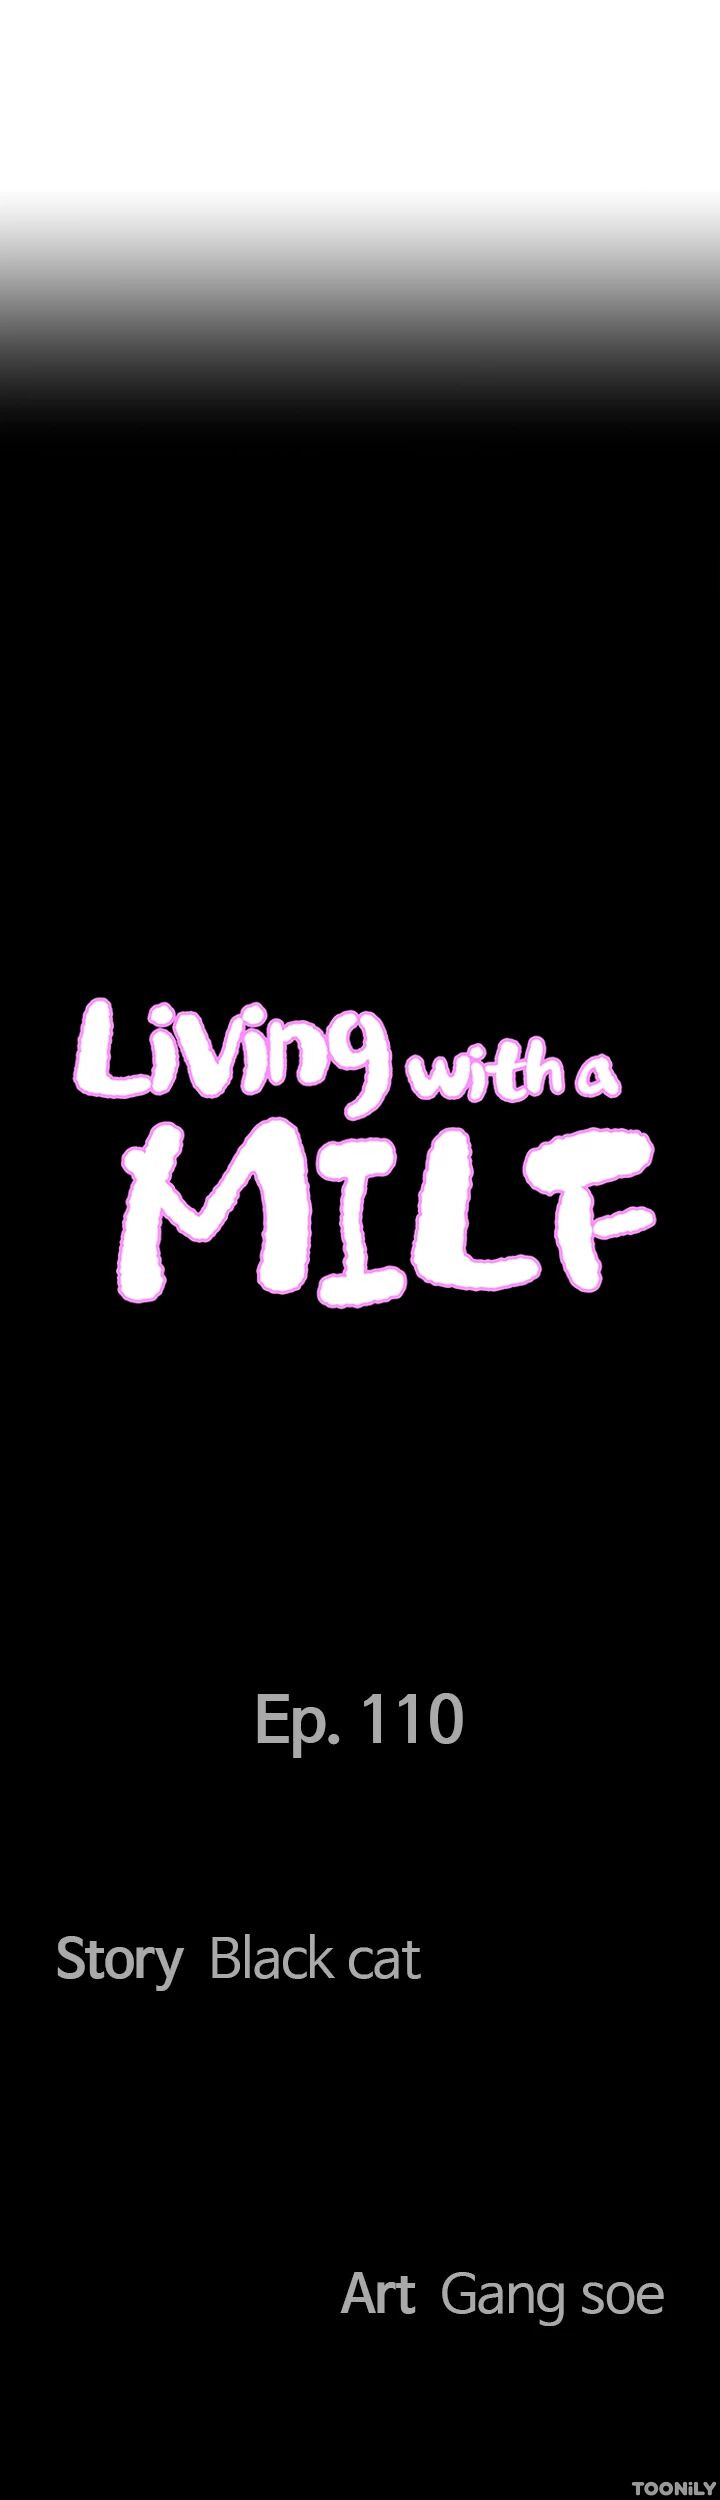 Living with a MILF image